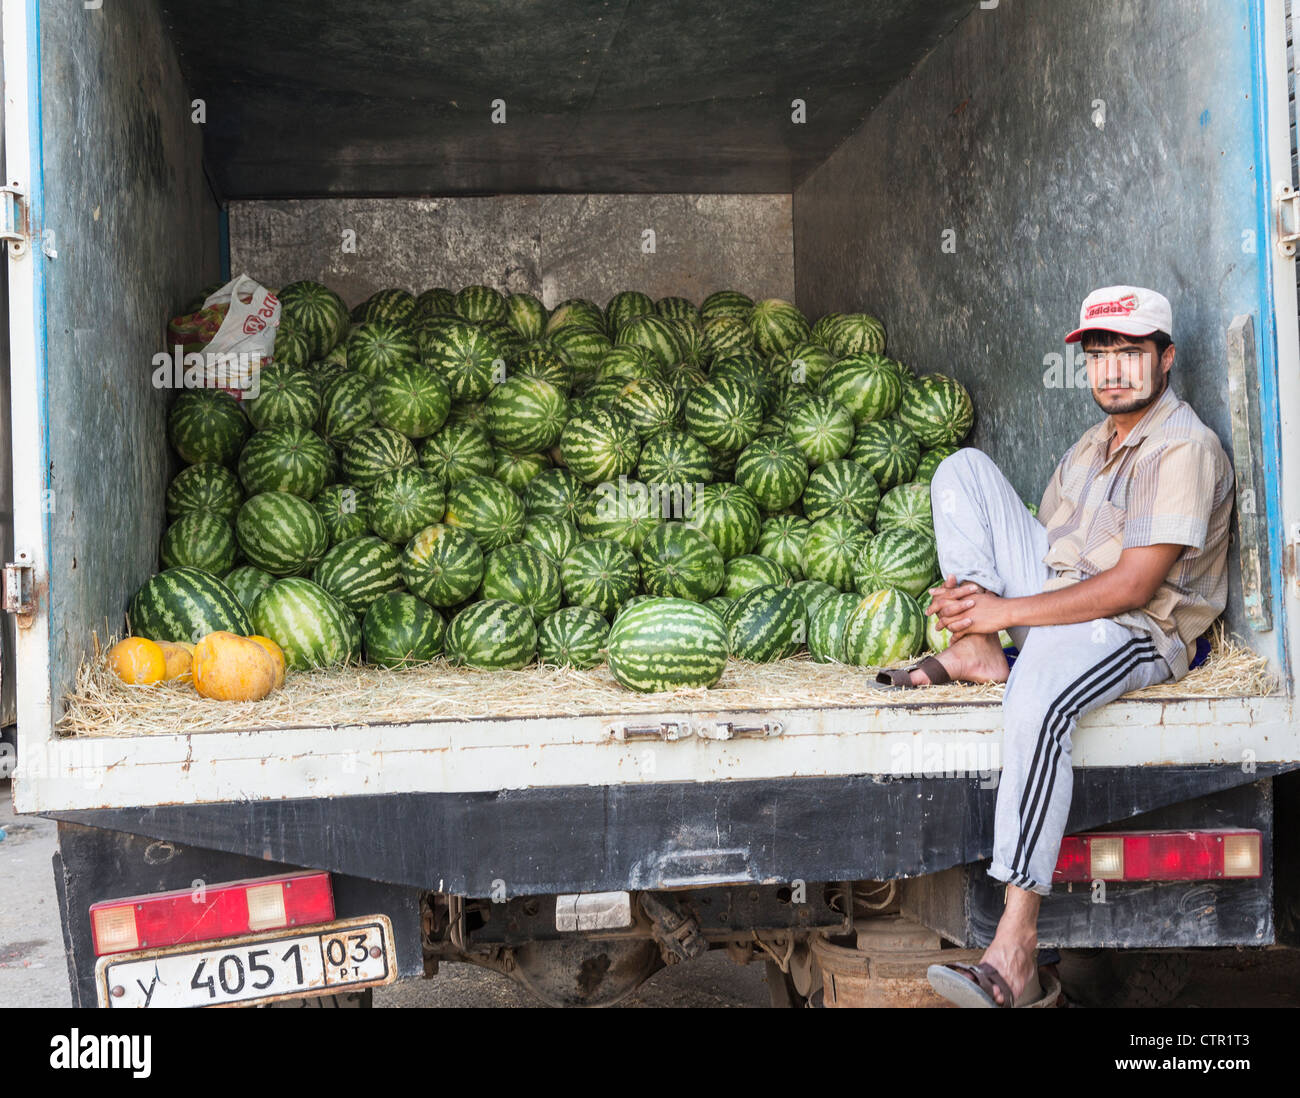 Guys Slicing Watermelon To Sell at Their Vendor at Galata District of  Istanbul Editorial Stock Photo - Image of knife, seller: 65970078